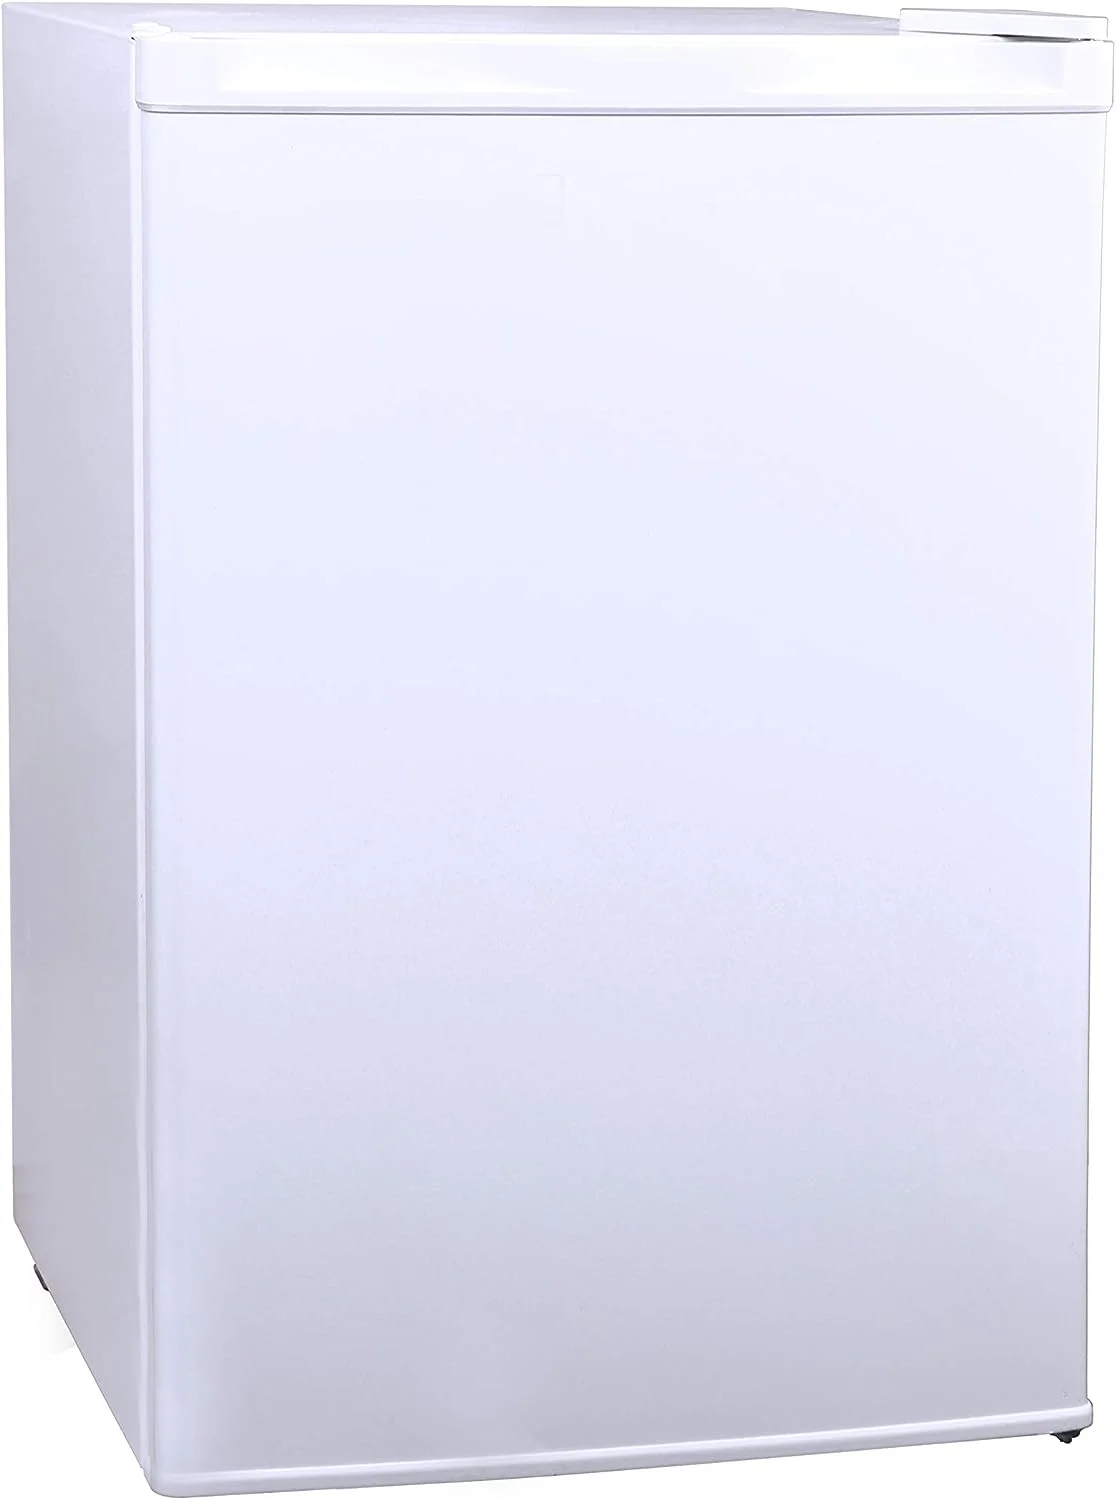 

RFRF323 White 3.2 cu. ft. Upright Freezer, Adjustable Thermostat-Compact Size